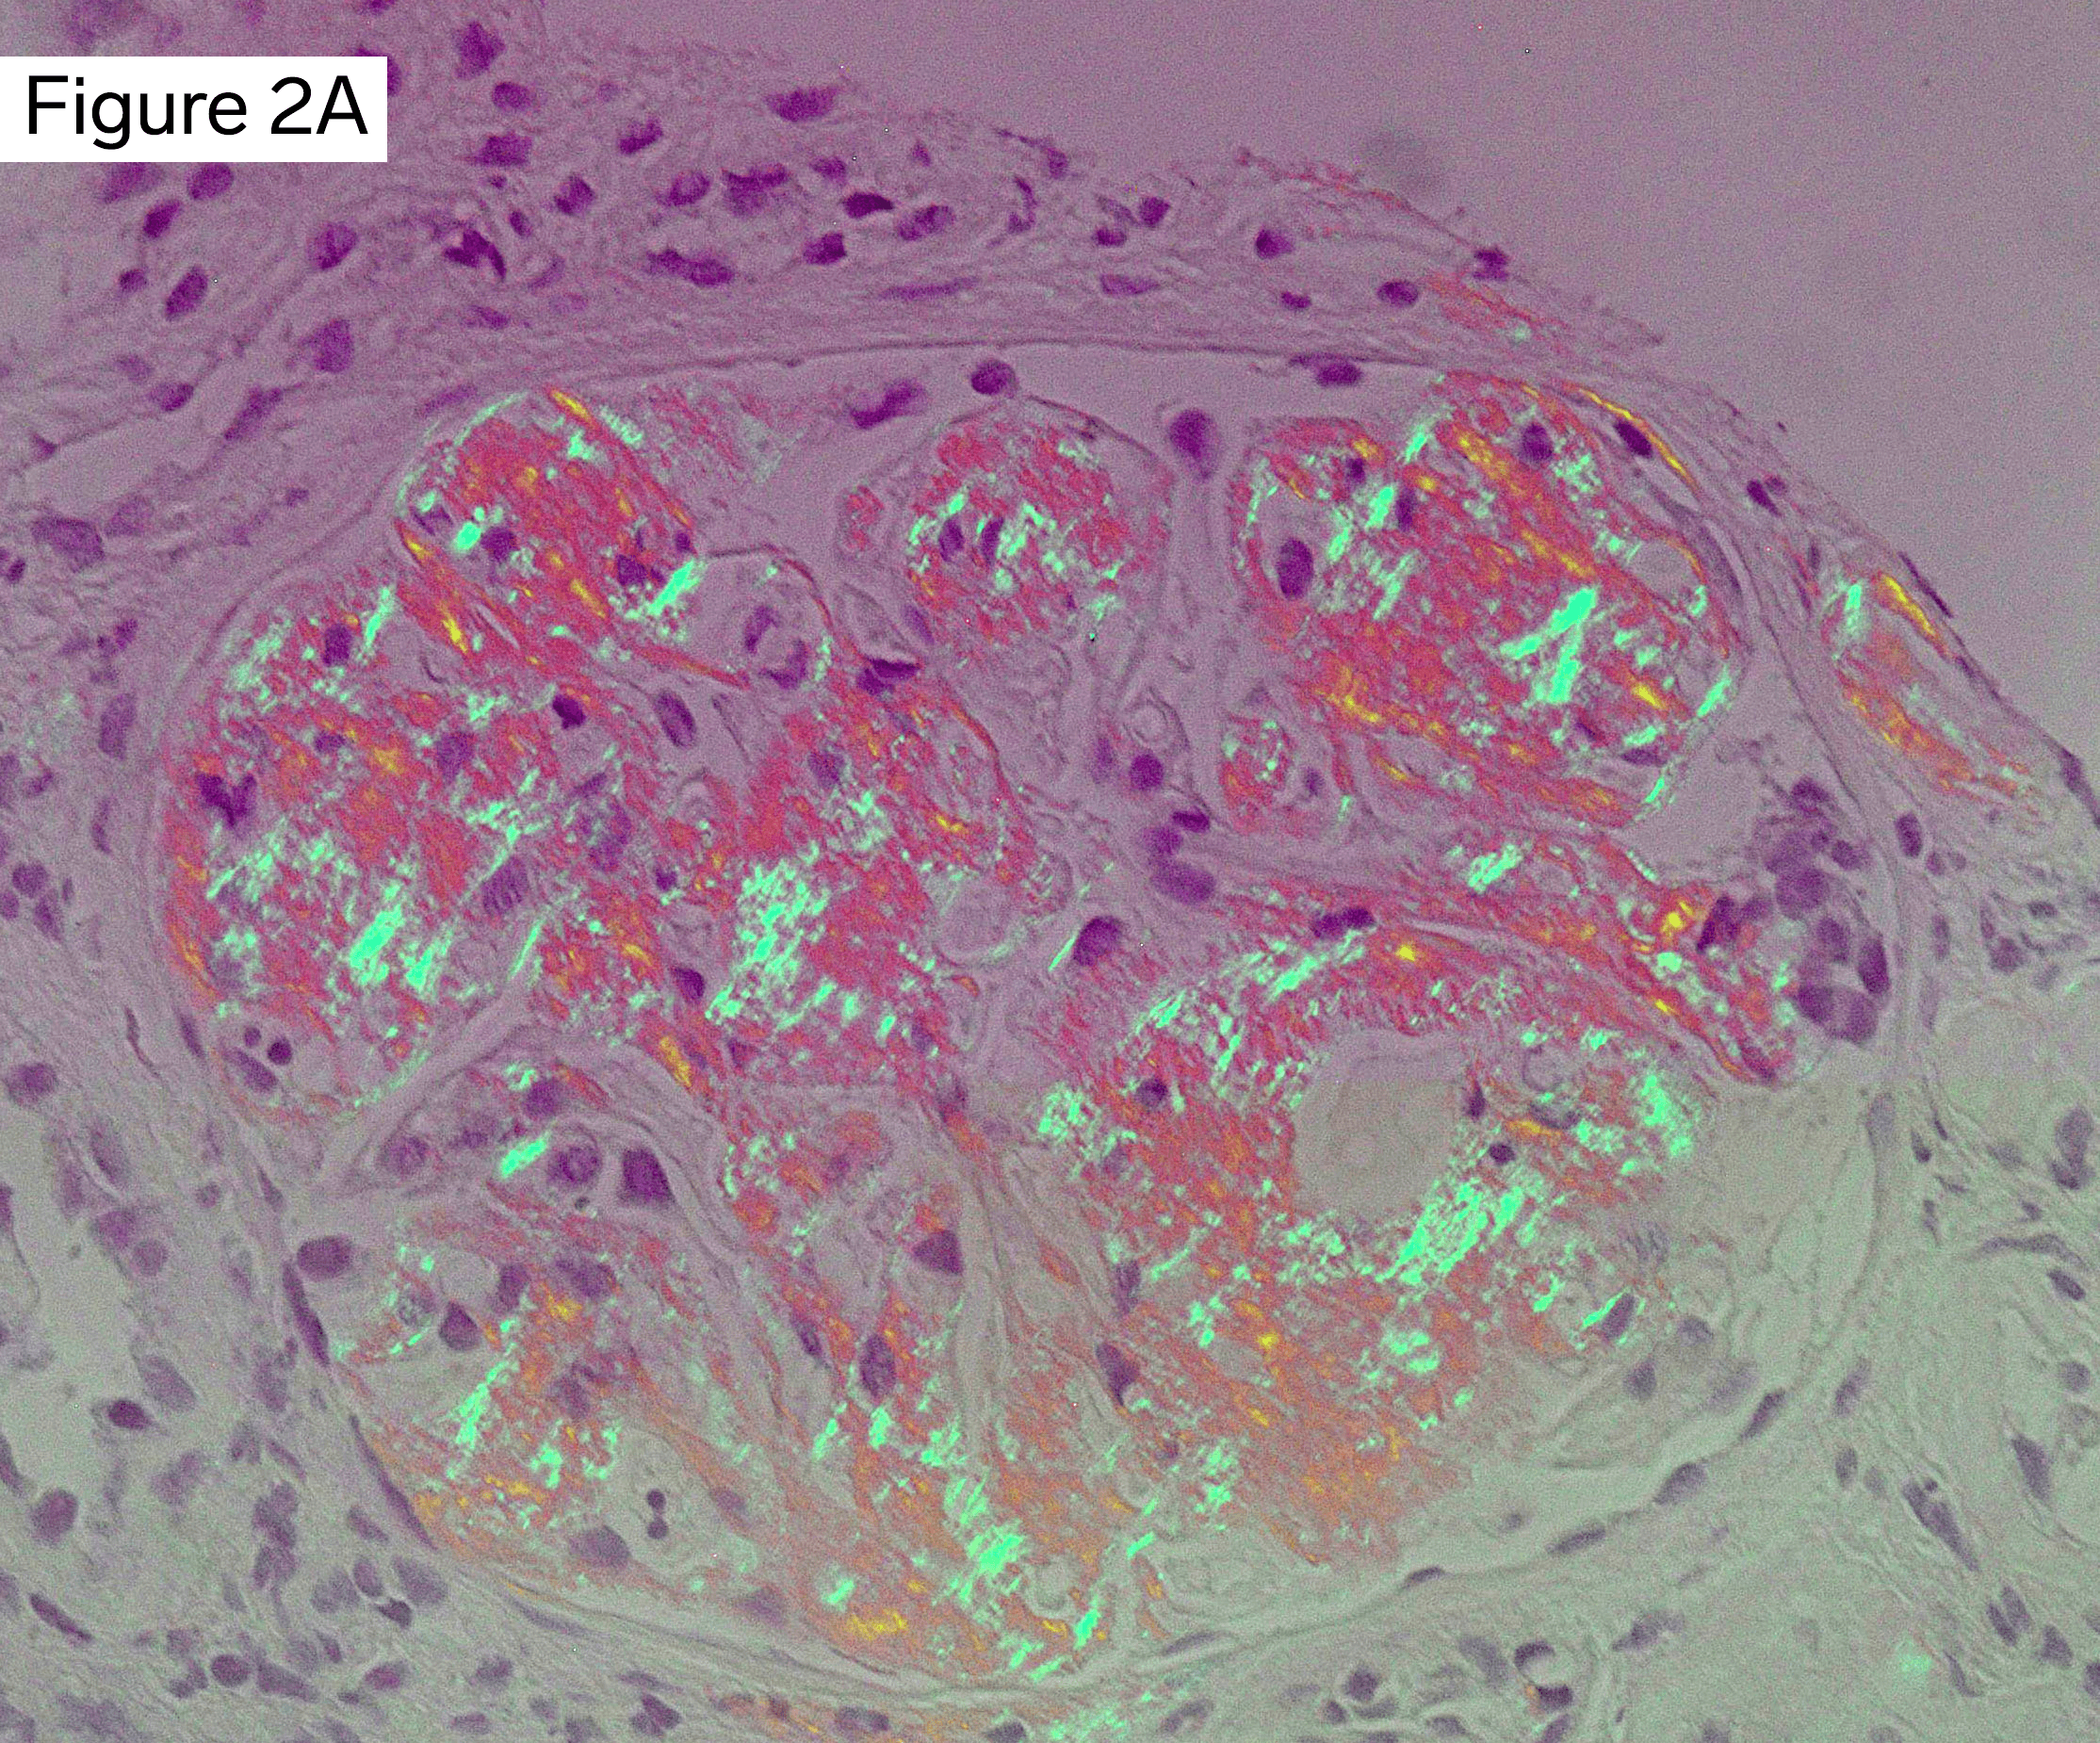 deposits stain positive on Congo red with apple-green birefringe, Amyloidosisnce upon polarization